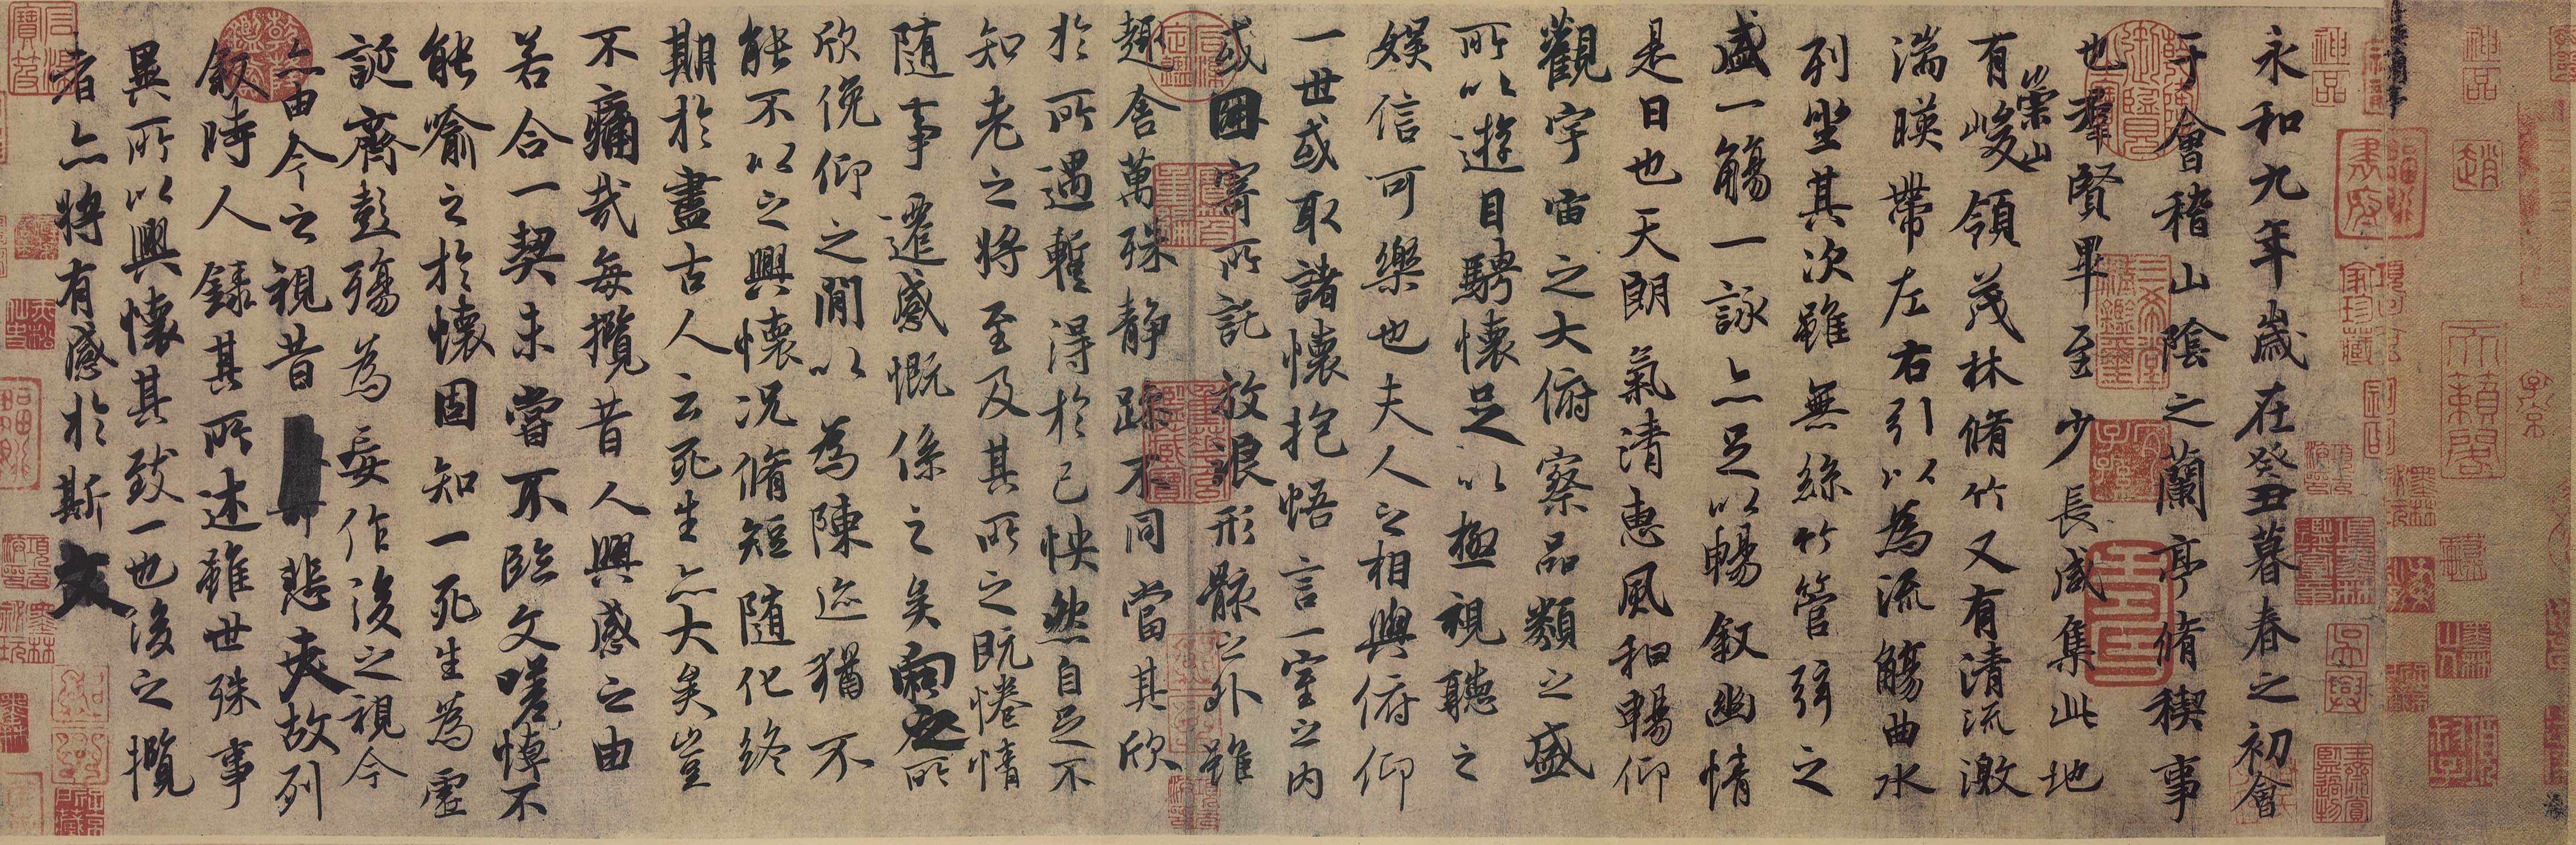 Image of Chinese calligraphy, showing vertical lines of text